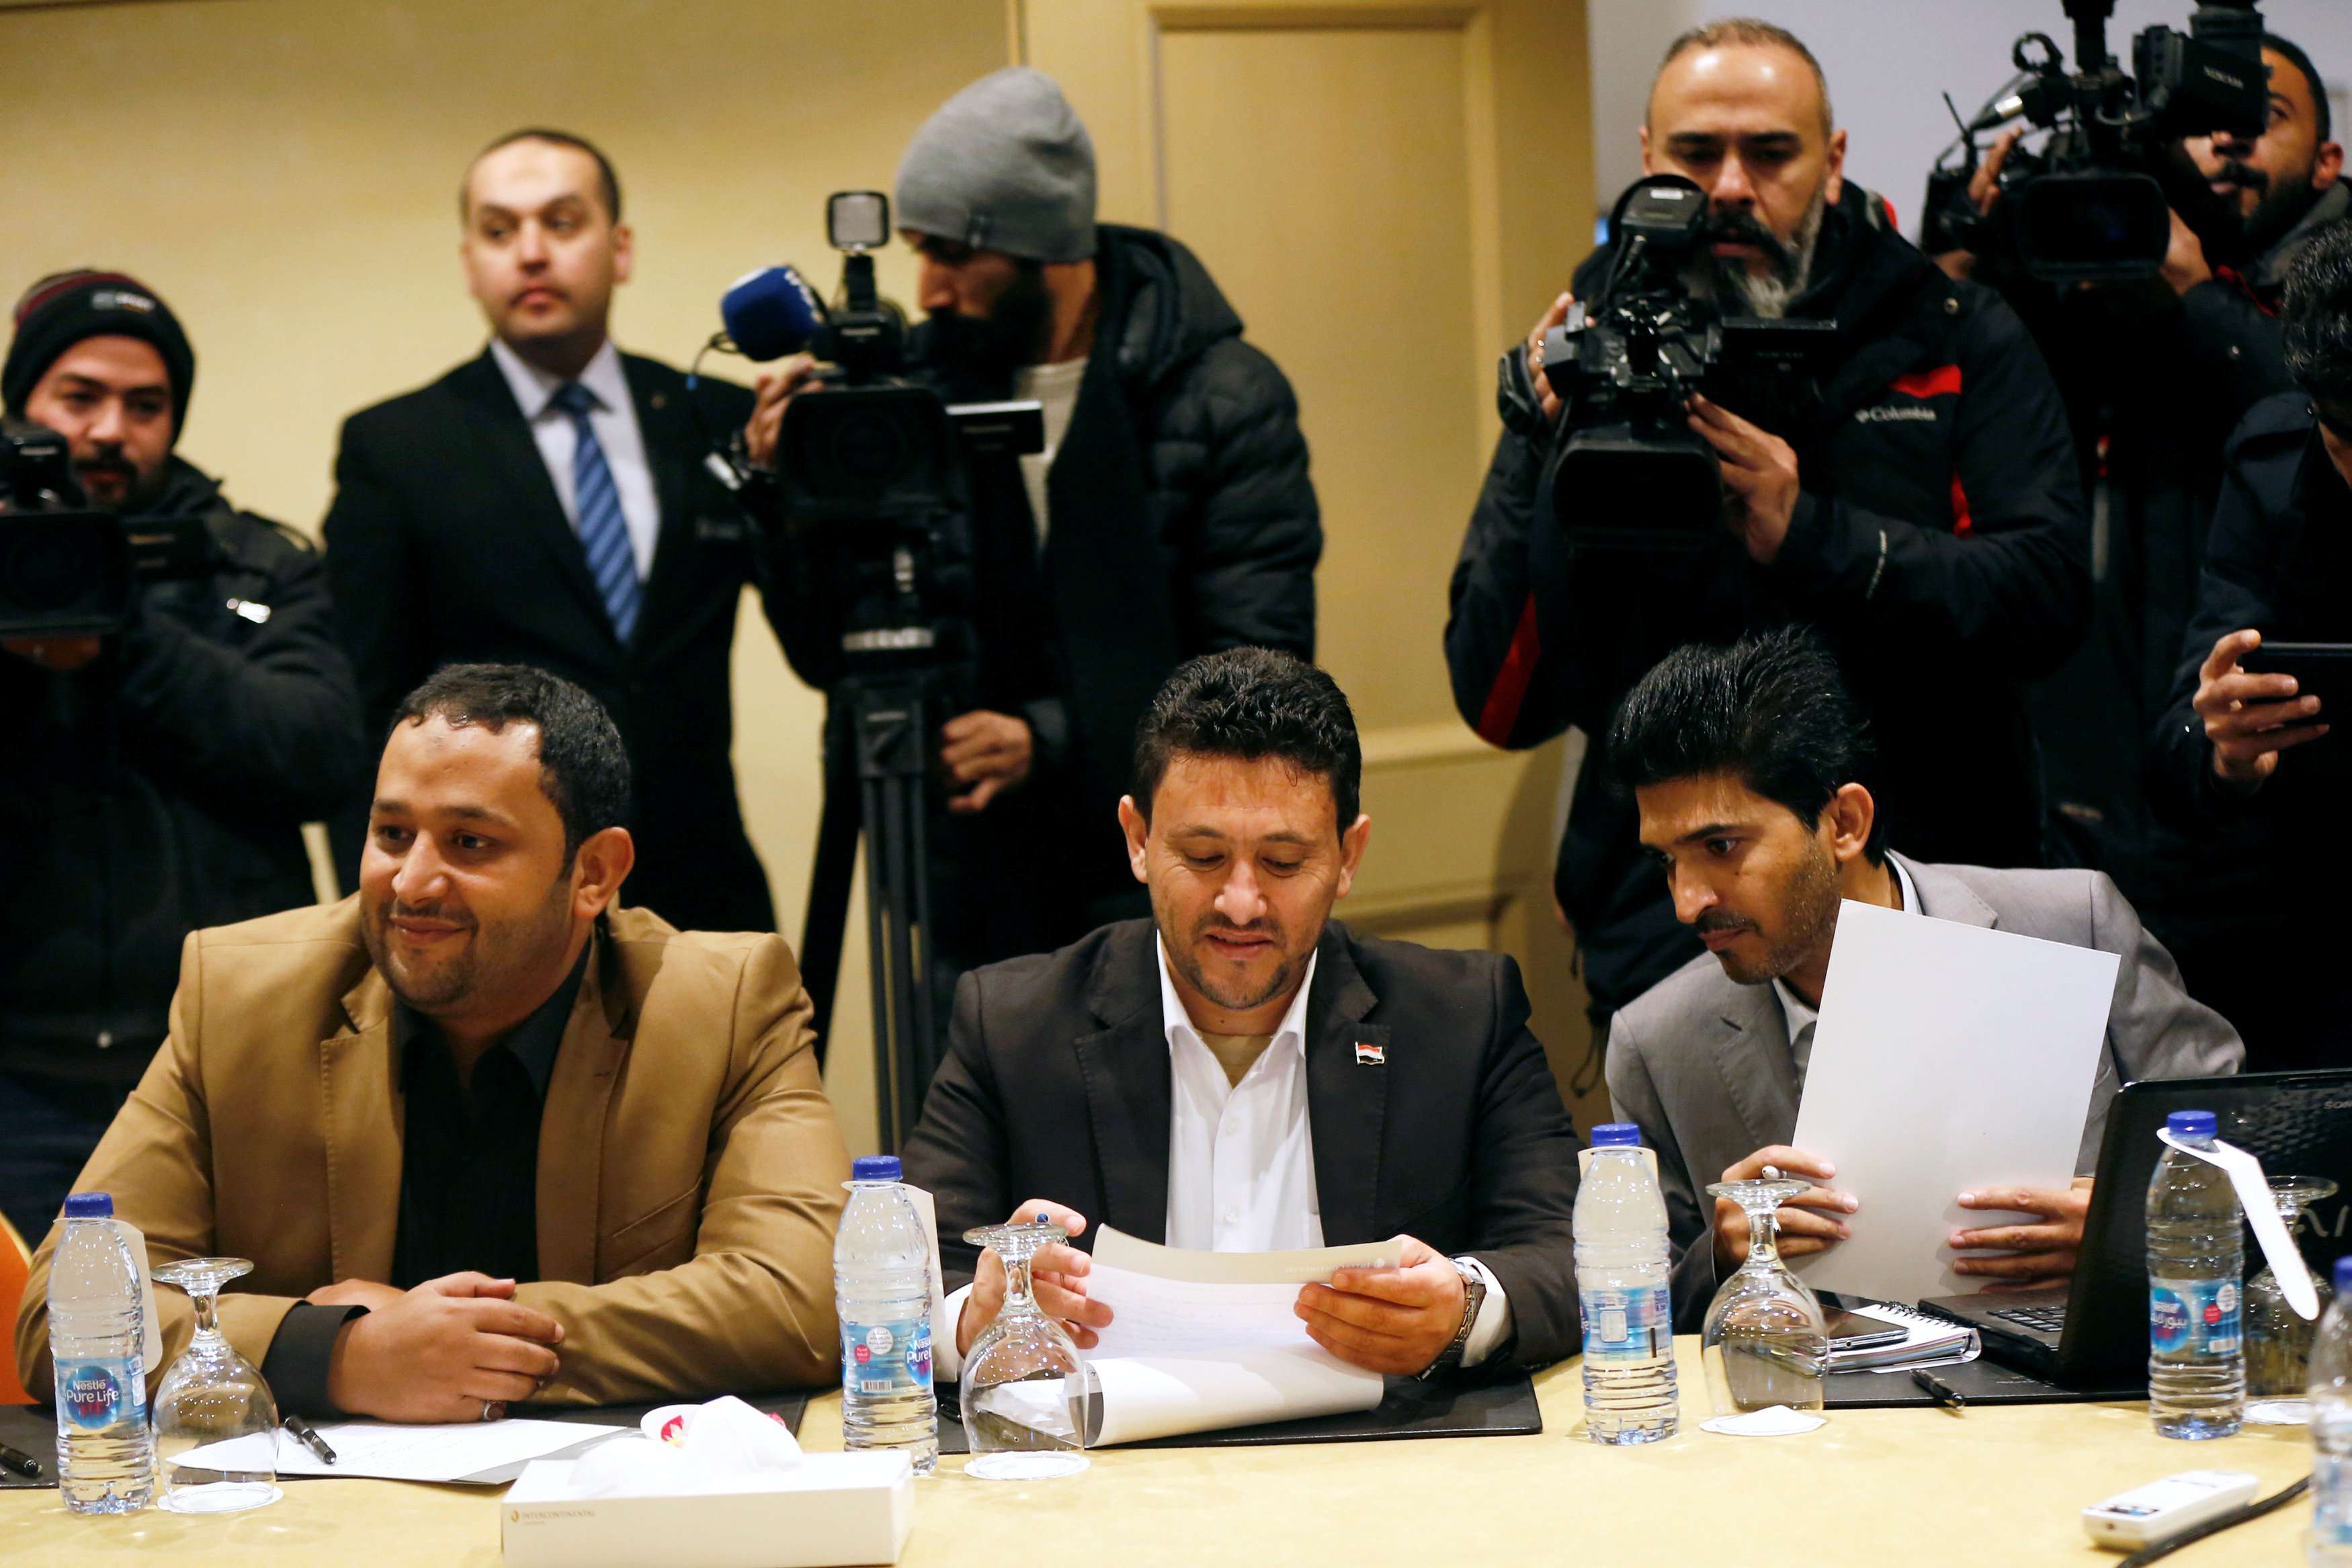 Abdul Qader Murtada, the head of Houthi delegation, attends a meeting to discuss prisoner swap deal between the Yemeni government and Houthi movement in Amman, Jordan January 17, 201